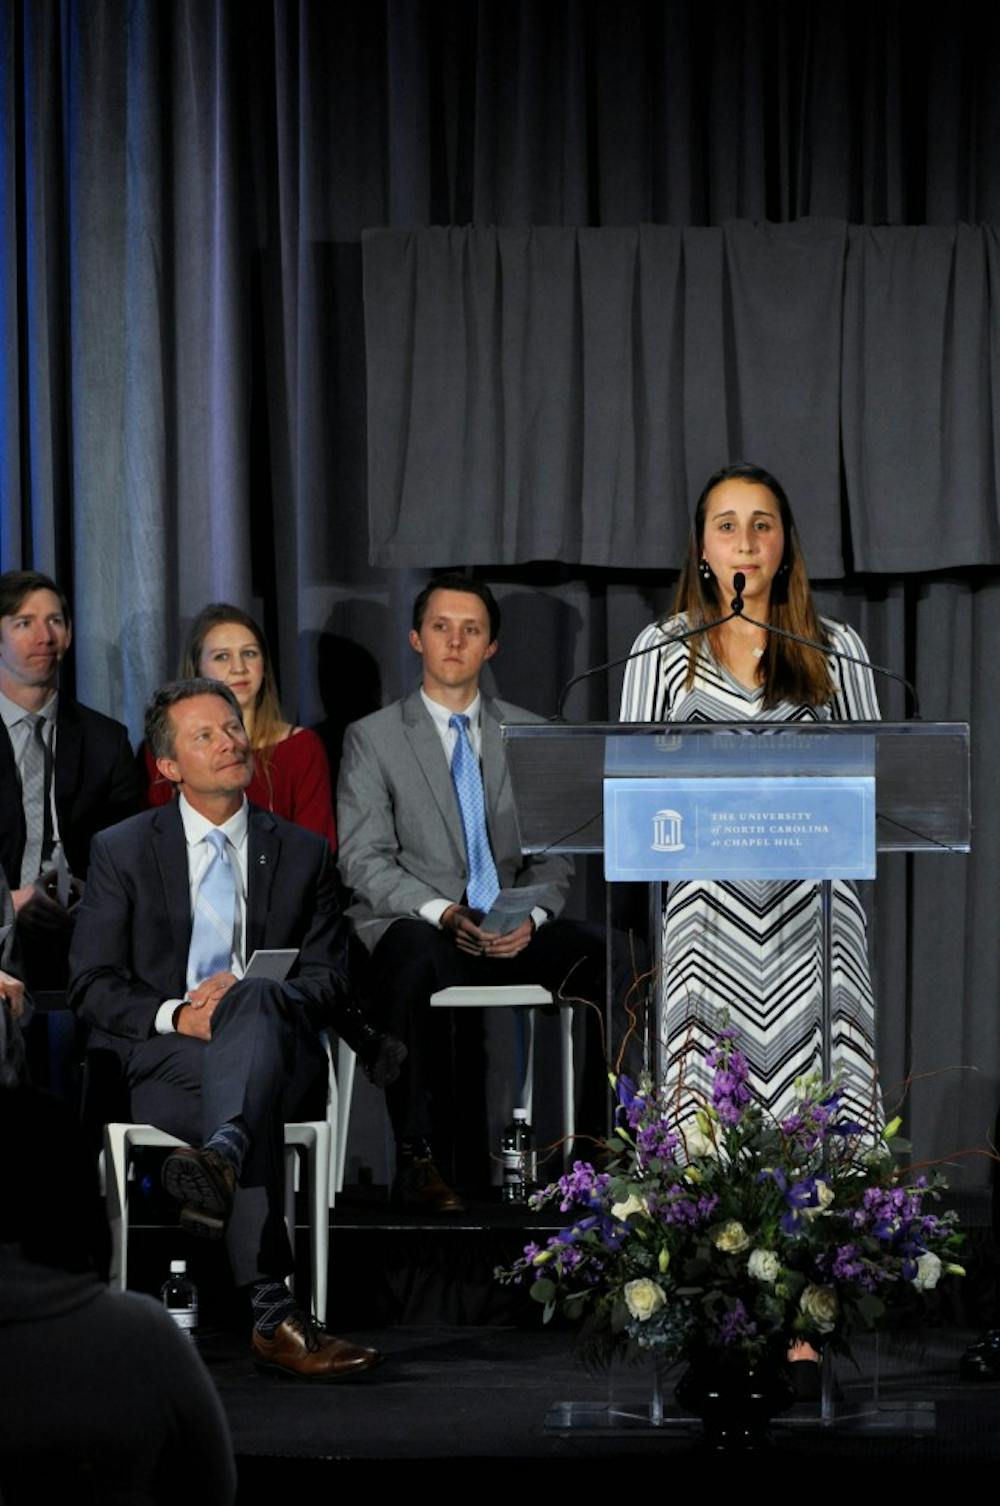 Second-year student at the School of Dentistry and a recipient of the Dr. Claude A. Adams Jr. scholarship Pegah Khosravi-Kamrani speaks at the announcement of a $27.68 million gift to UNC's School of Dentistry in the Koury Oral Health Sciences building on Wednesday, Feb. 20, 2019. "I pledge to use dentistry as a means to serve others facing dental hardships," said Khosravi-Kamrani during her remarks.